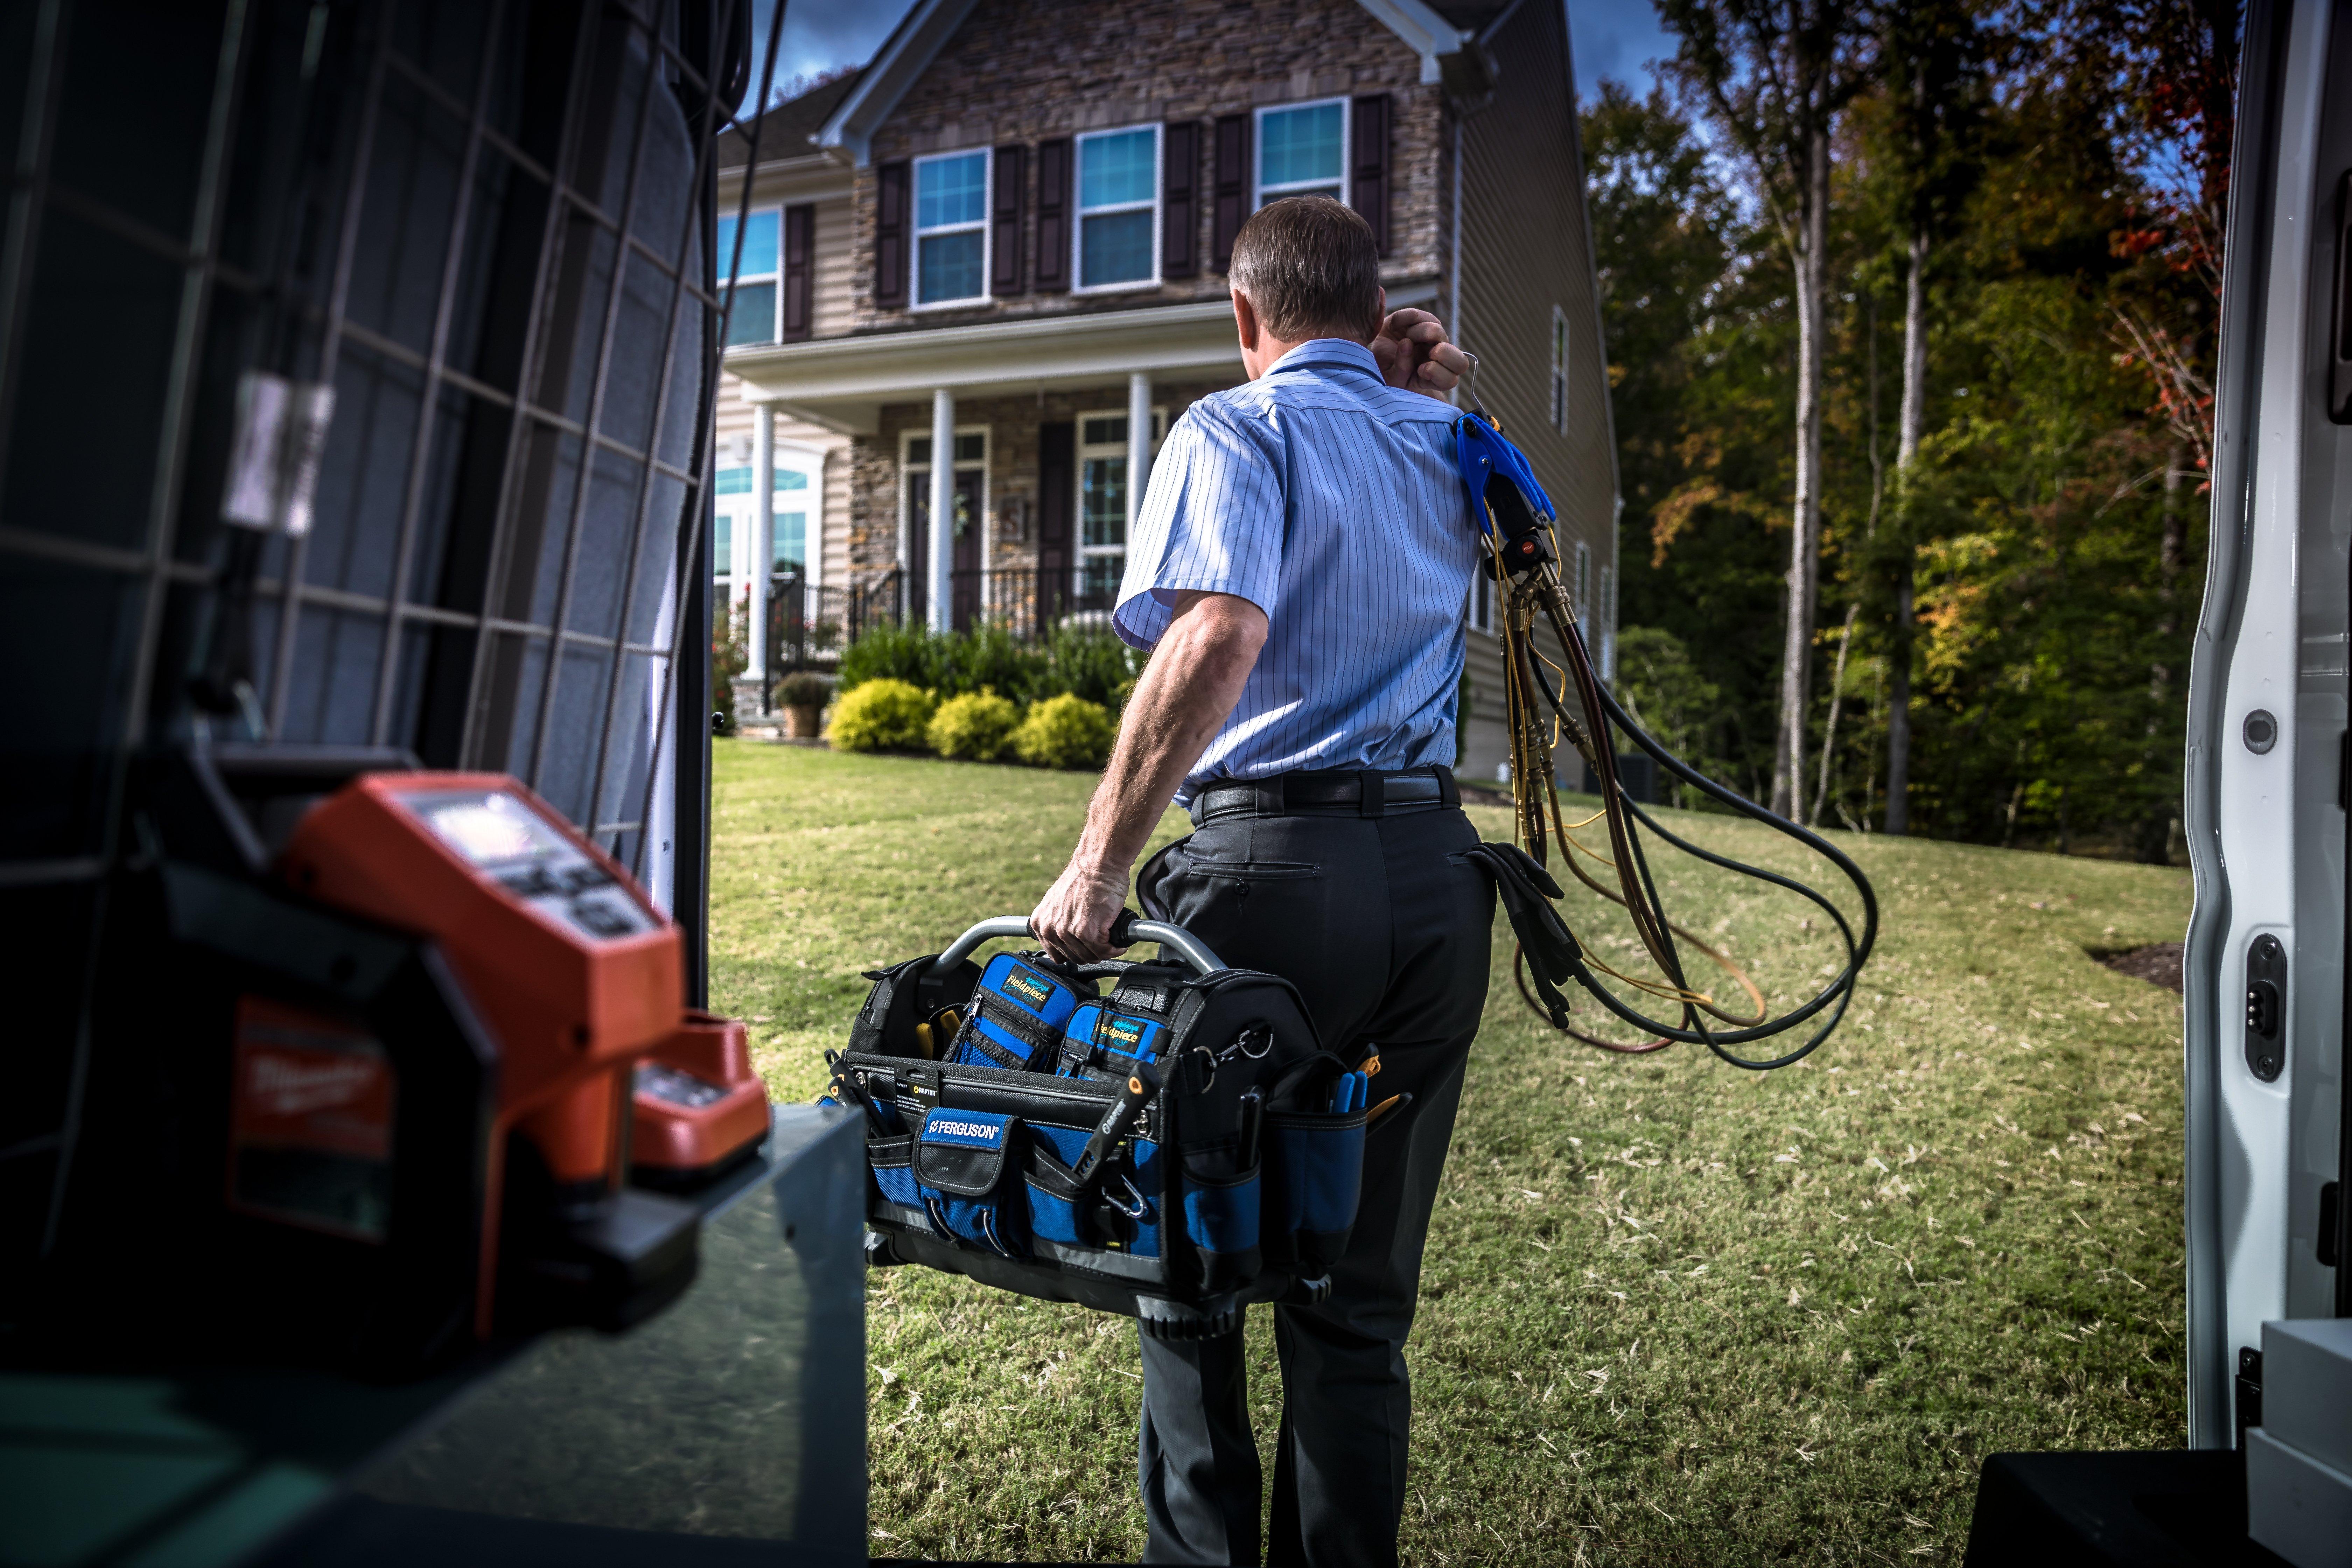 An HVAC technician carries a toolbag and cables from his work van toward a suburban two-story home.